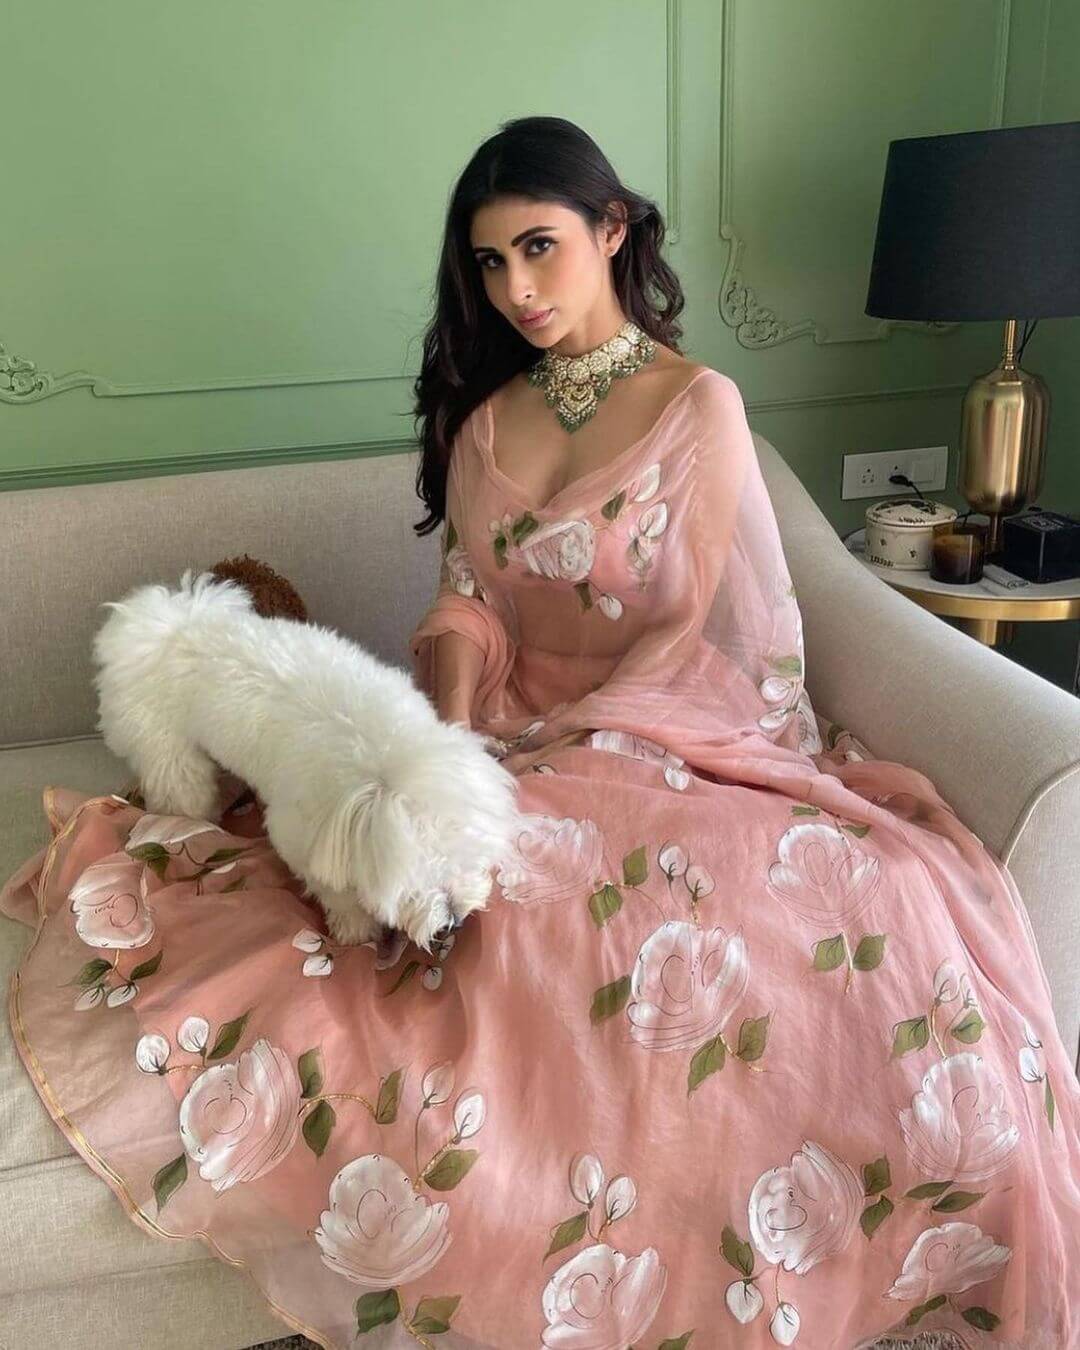 Mouni Roy's Spring-Inspired Look: Simple and Delicate